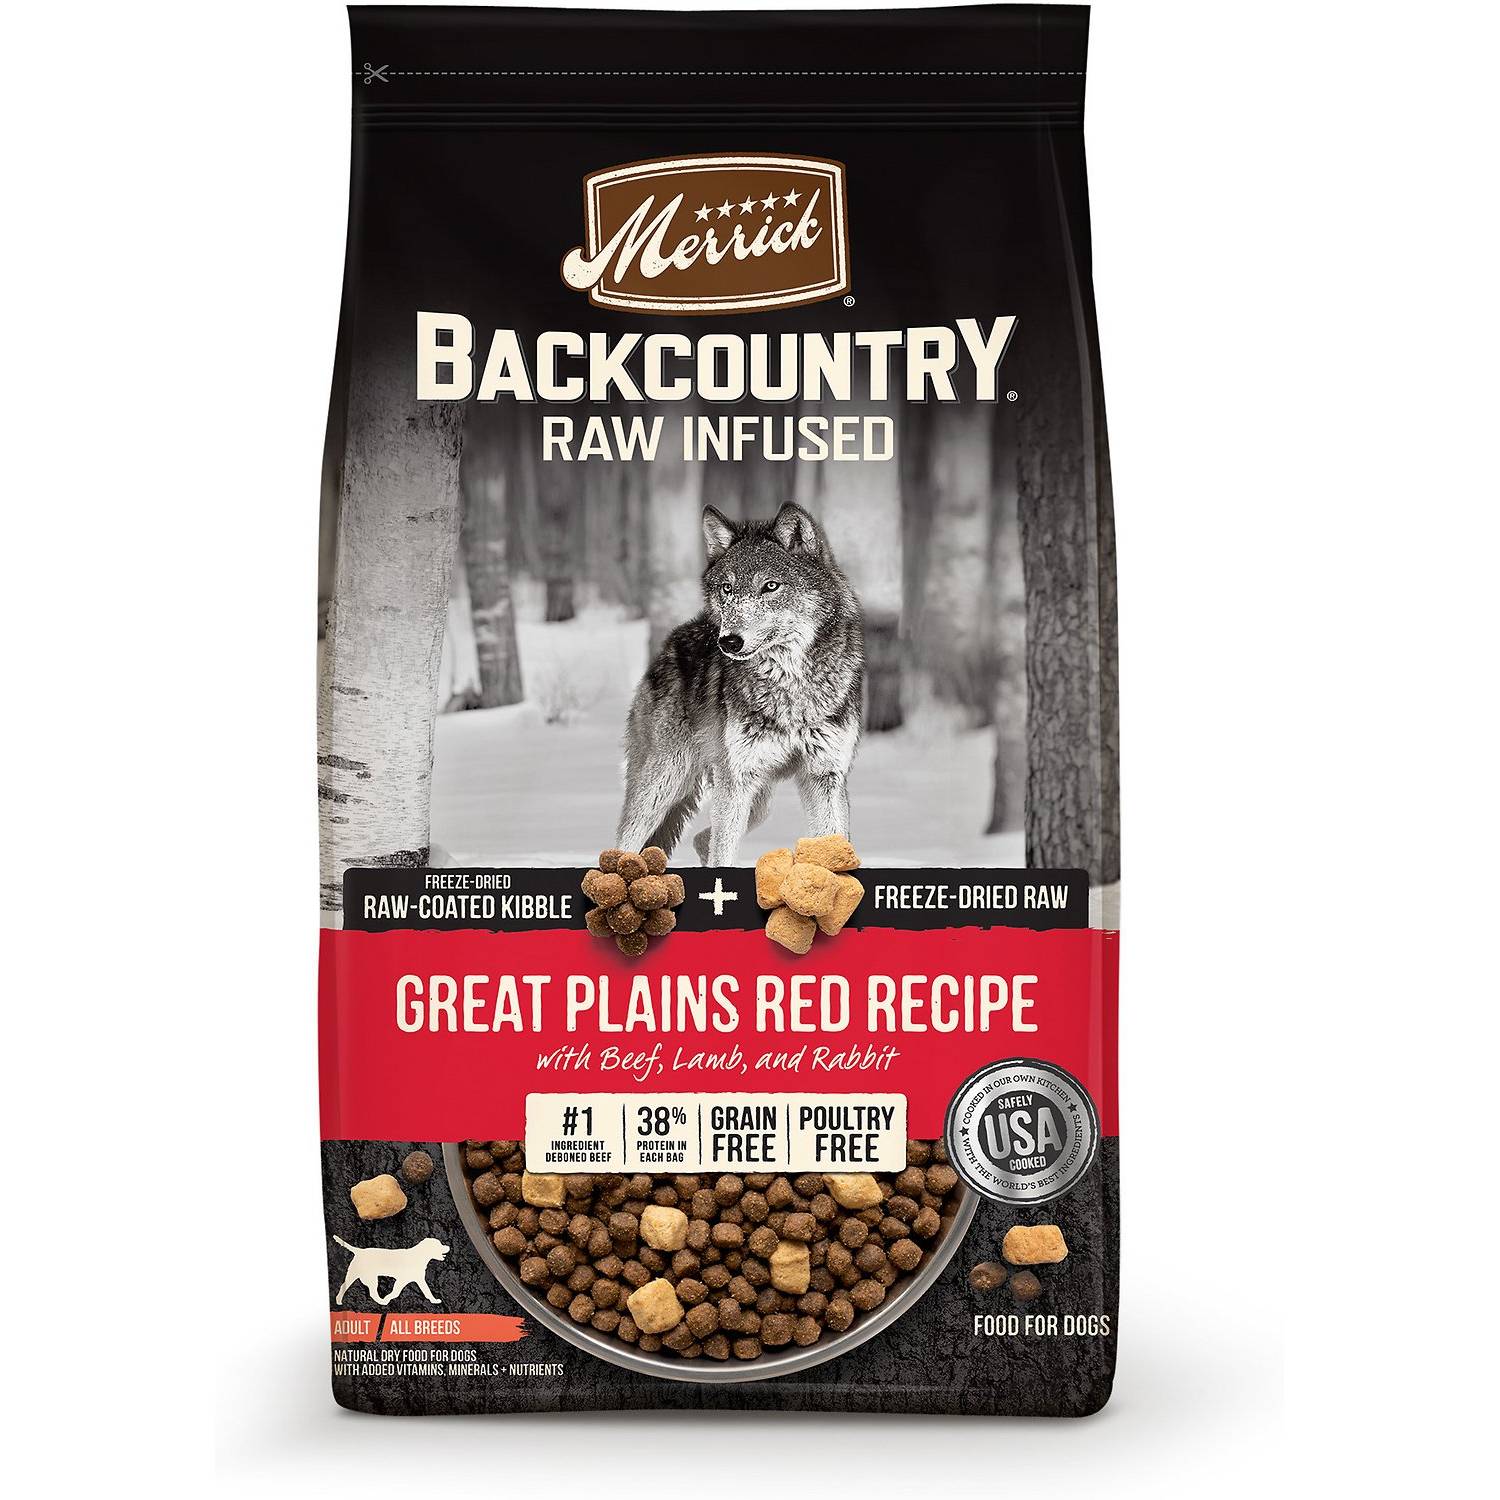 Merrick Back Country Raw Infused Great Plains Red Recipe (1)